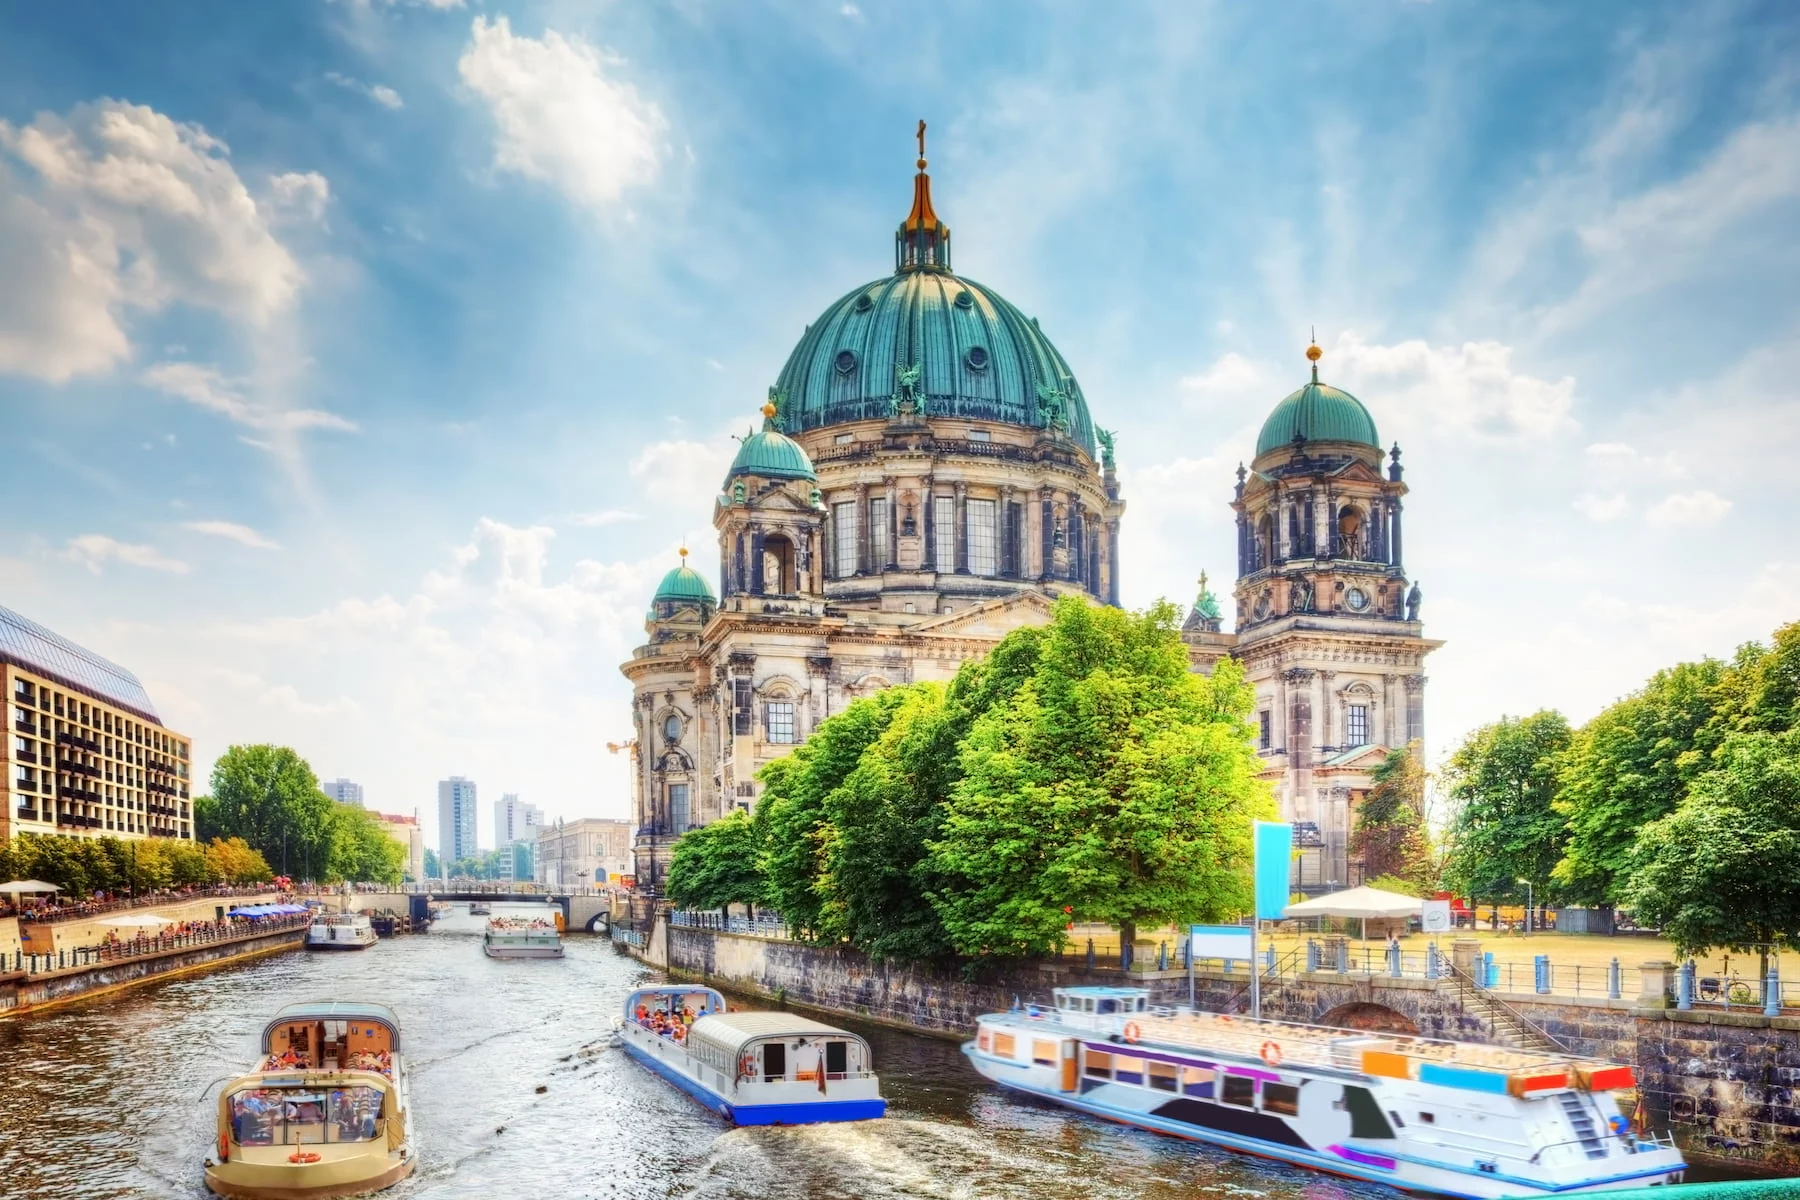 The Berlin Cathedral (Berliner Dom)